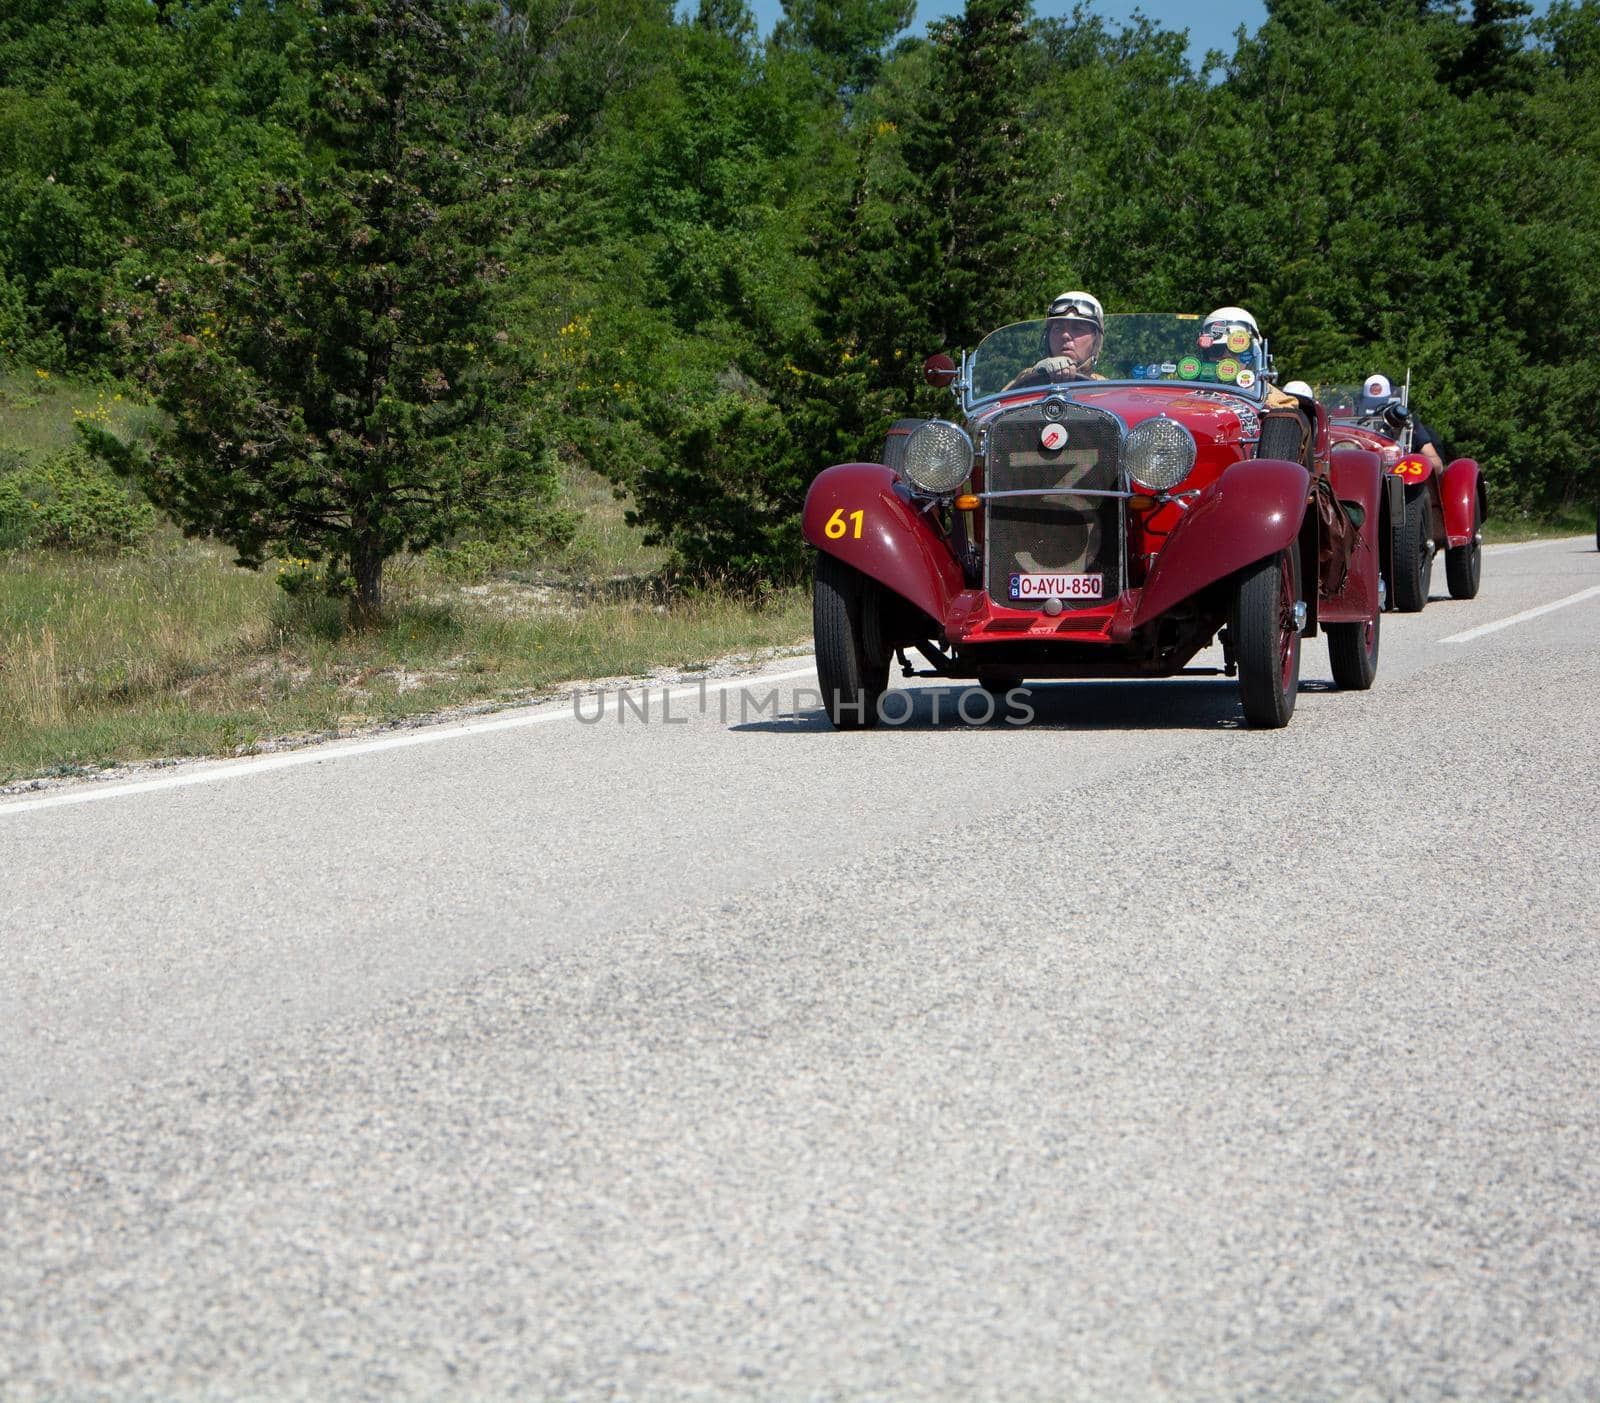 fiat on an old racing car in rally Mille Miglia 2022 the famous italian historical race (1927-1957 by massimocampanari